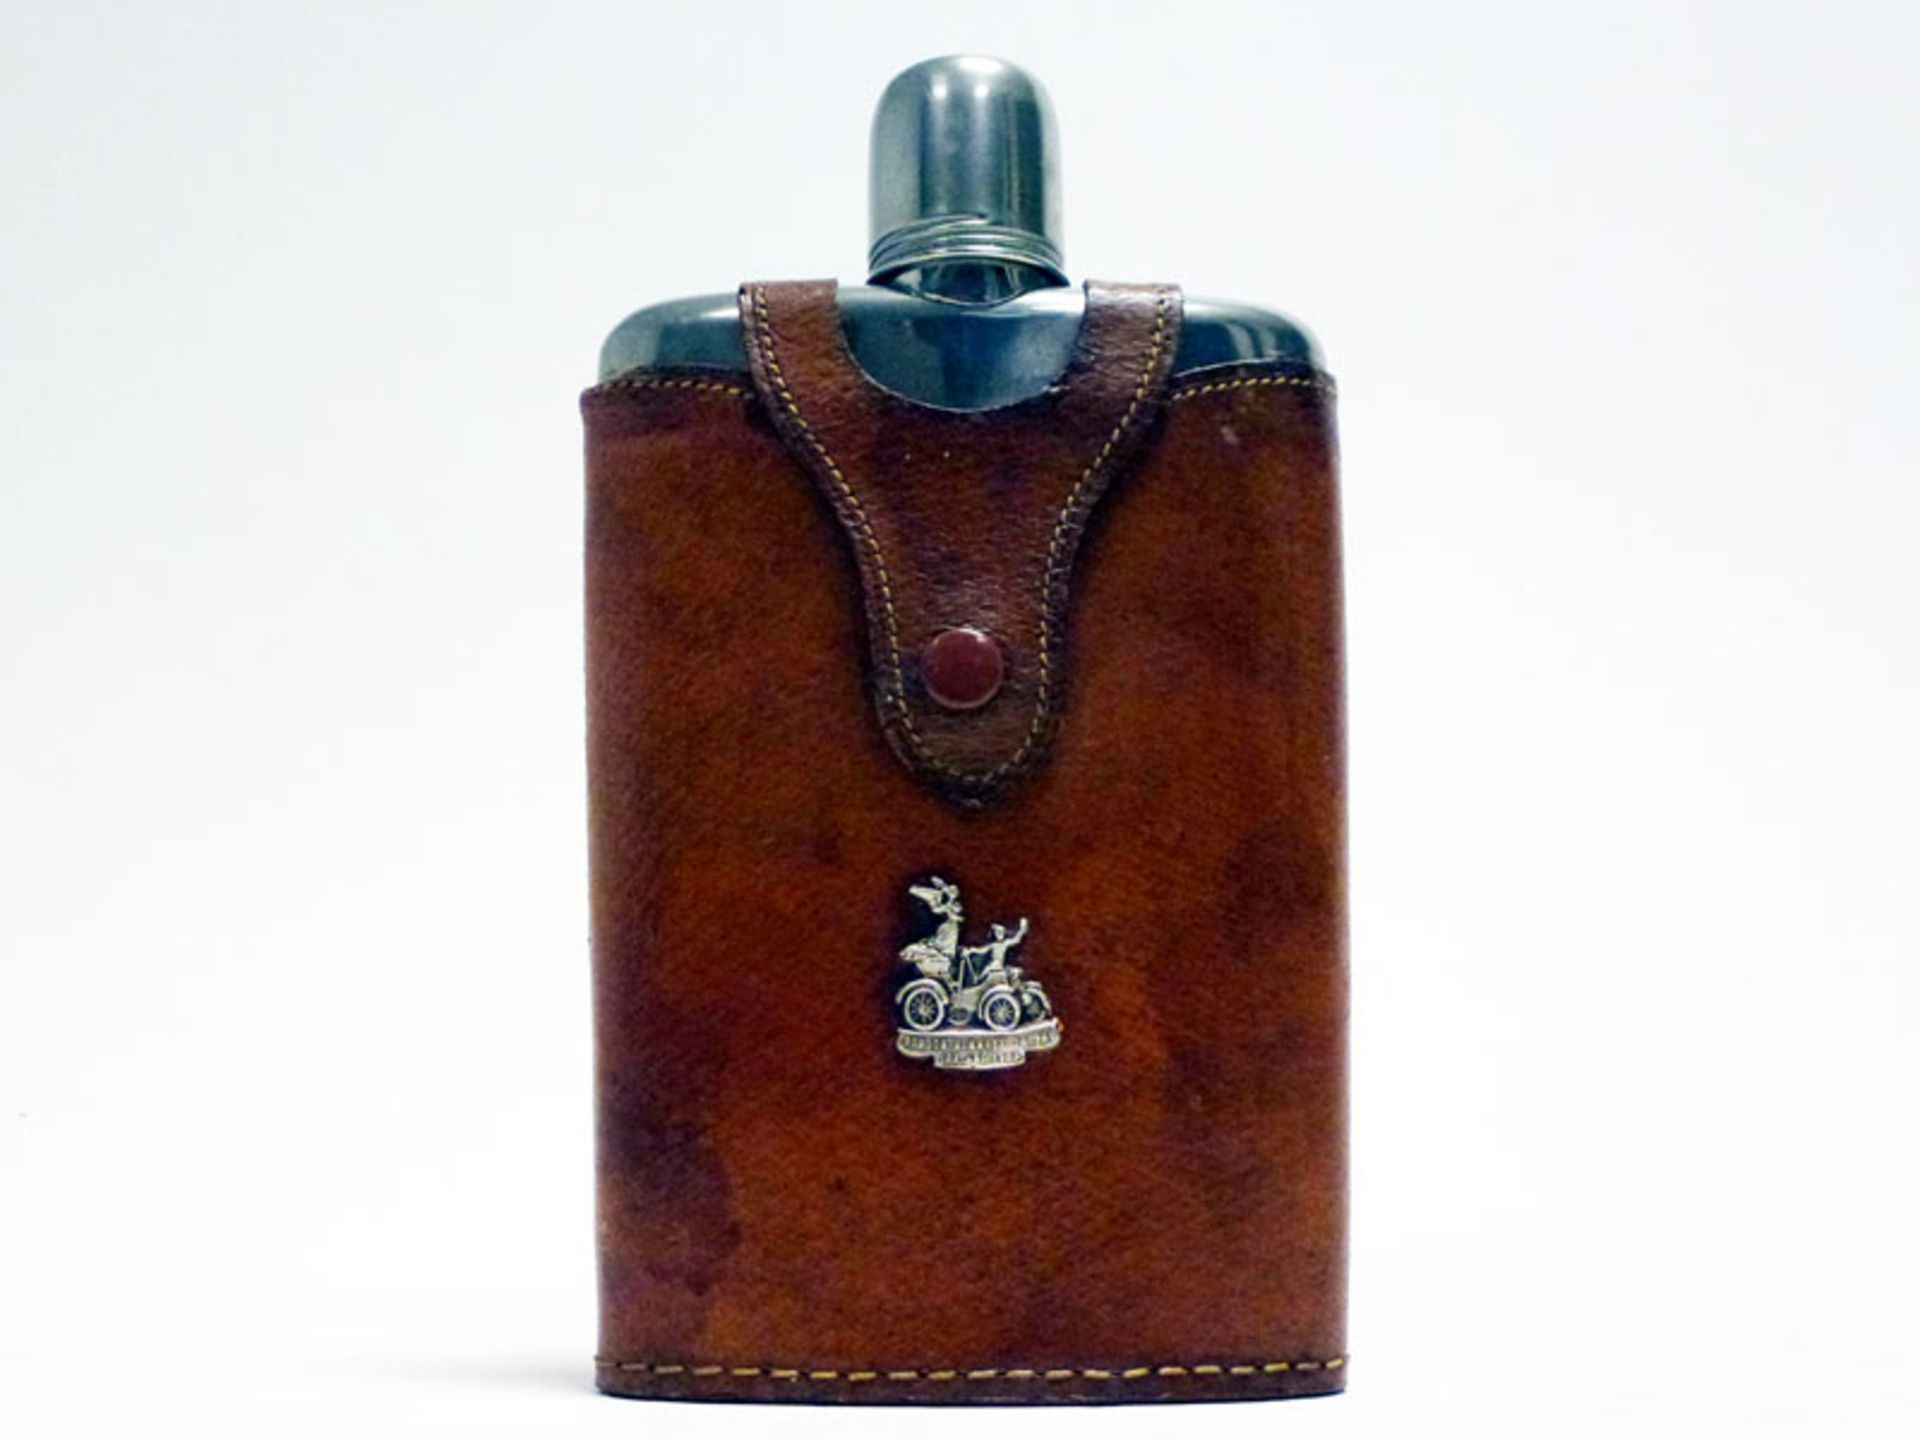 A Leather-Covered Drinks Flask